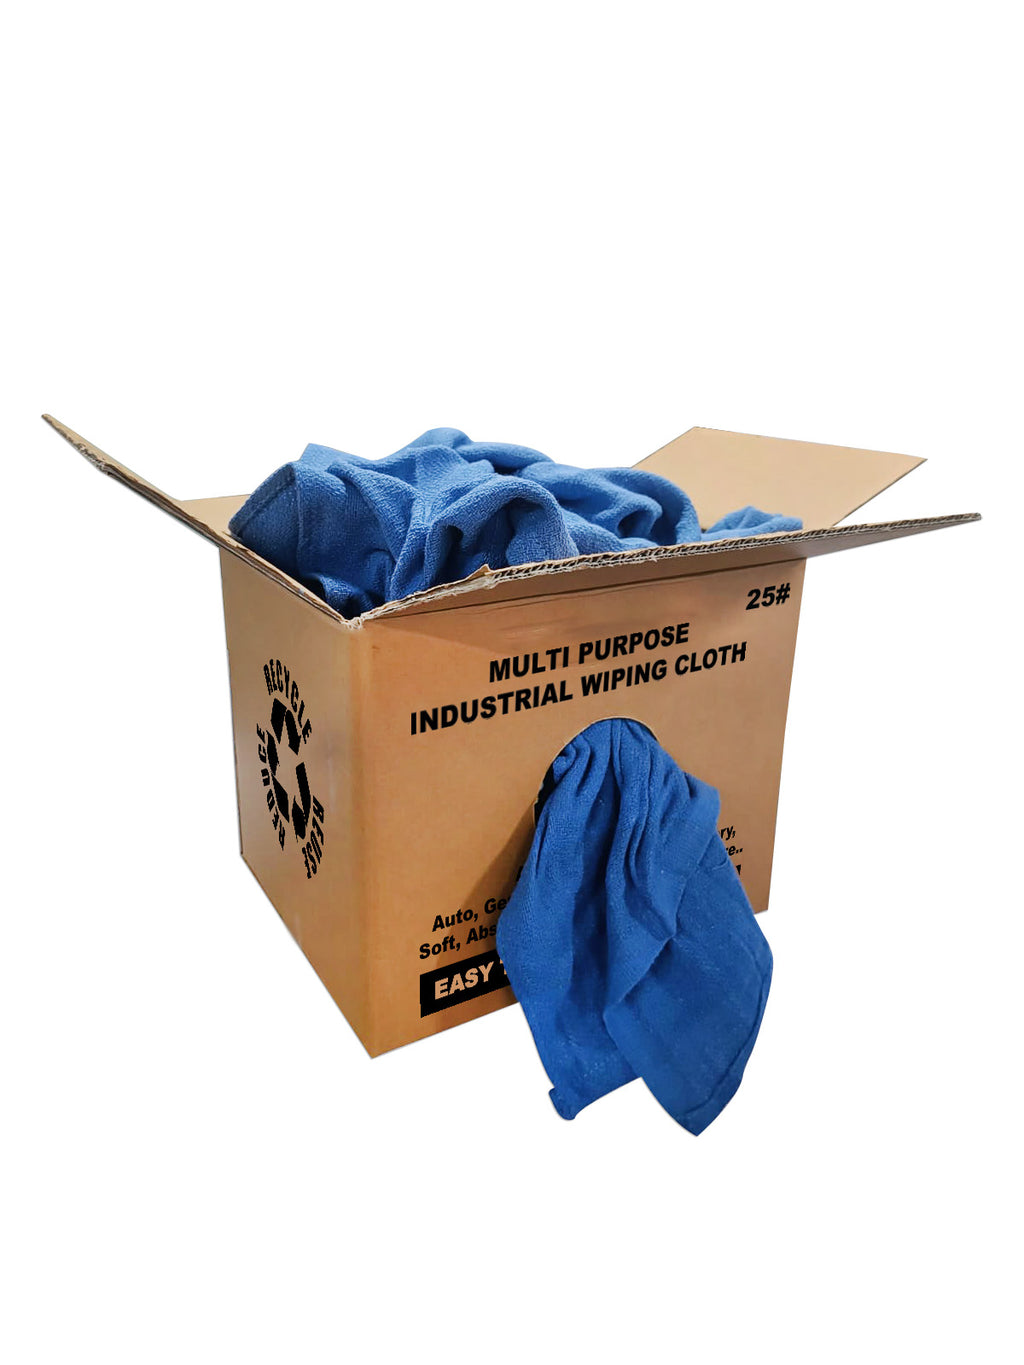 Blue Huck /Surgical Towels - 25 lbs. Box Multipurpose Cleaning